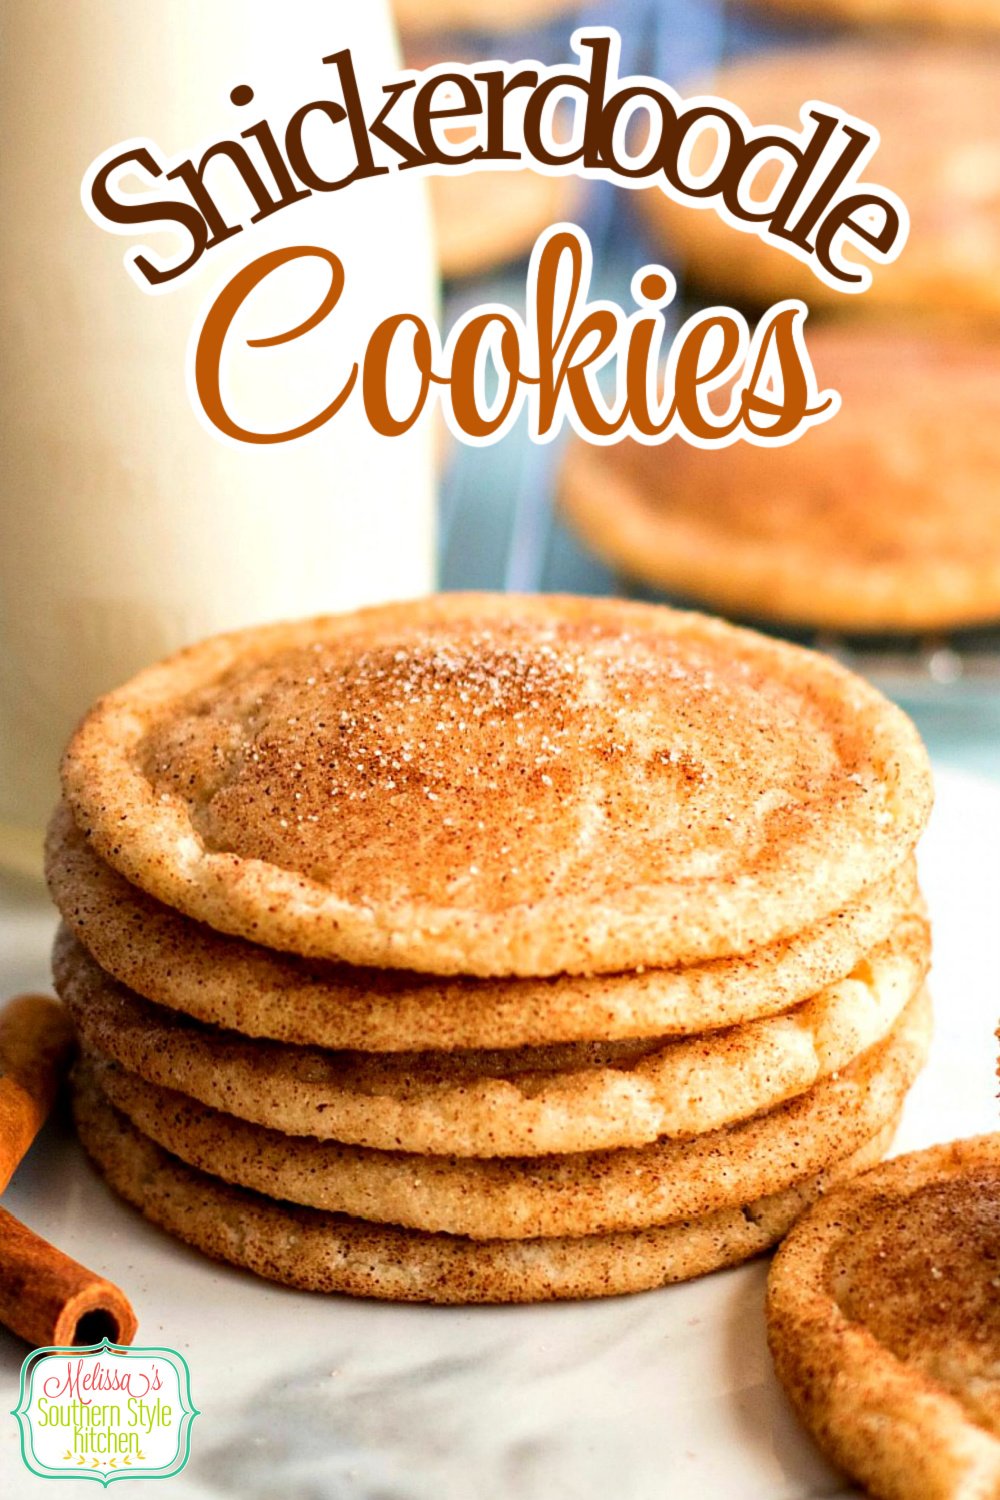 These sweet and spicy Snickerdoodle Cookies won't last long in your cookie jar #snickerdoodles #snickerdoodlecookies #cookies #holidaybaking #christmascookies #cinnamon #spicecookies #desserts #dessertfoodrecipes #southernfood #southernrecipes via @melissasssk